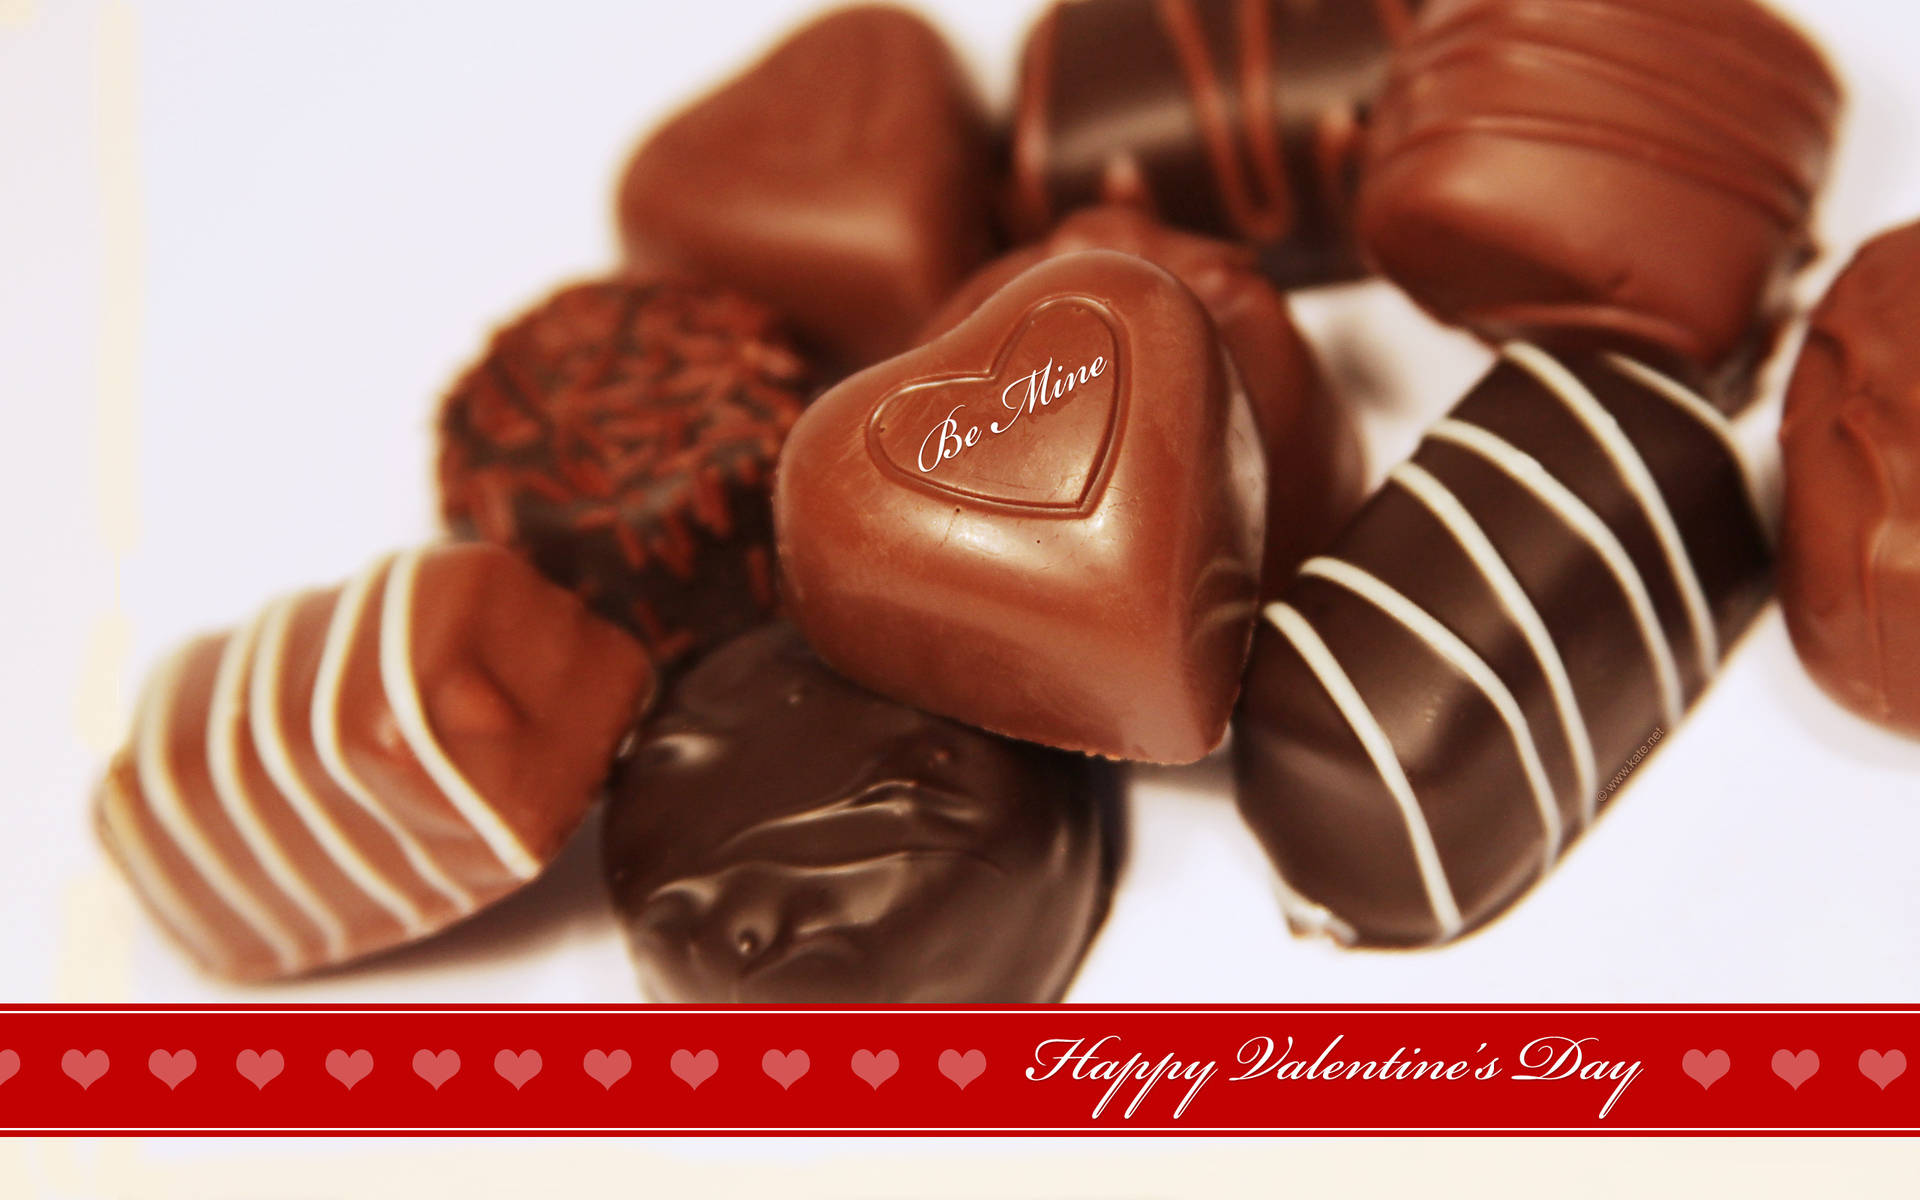 "Celebrate Valentine's Day with love and joy!" Wallpaper